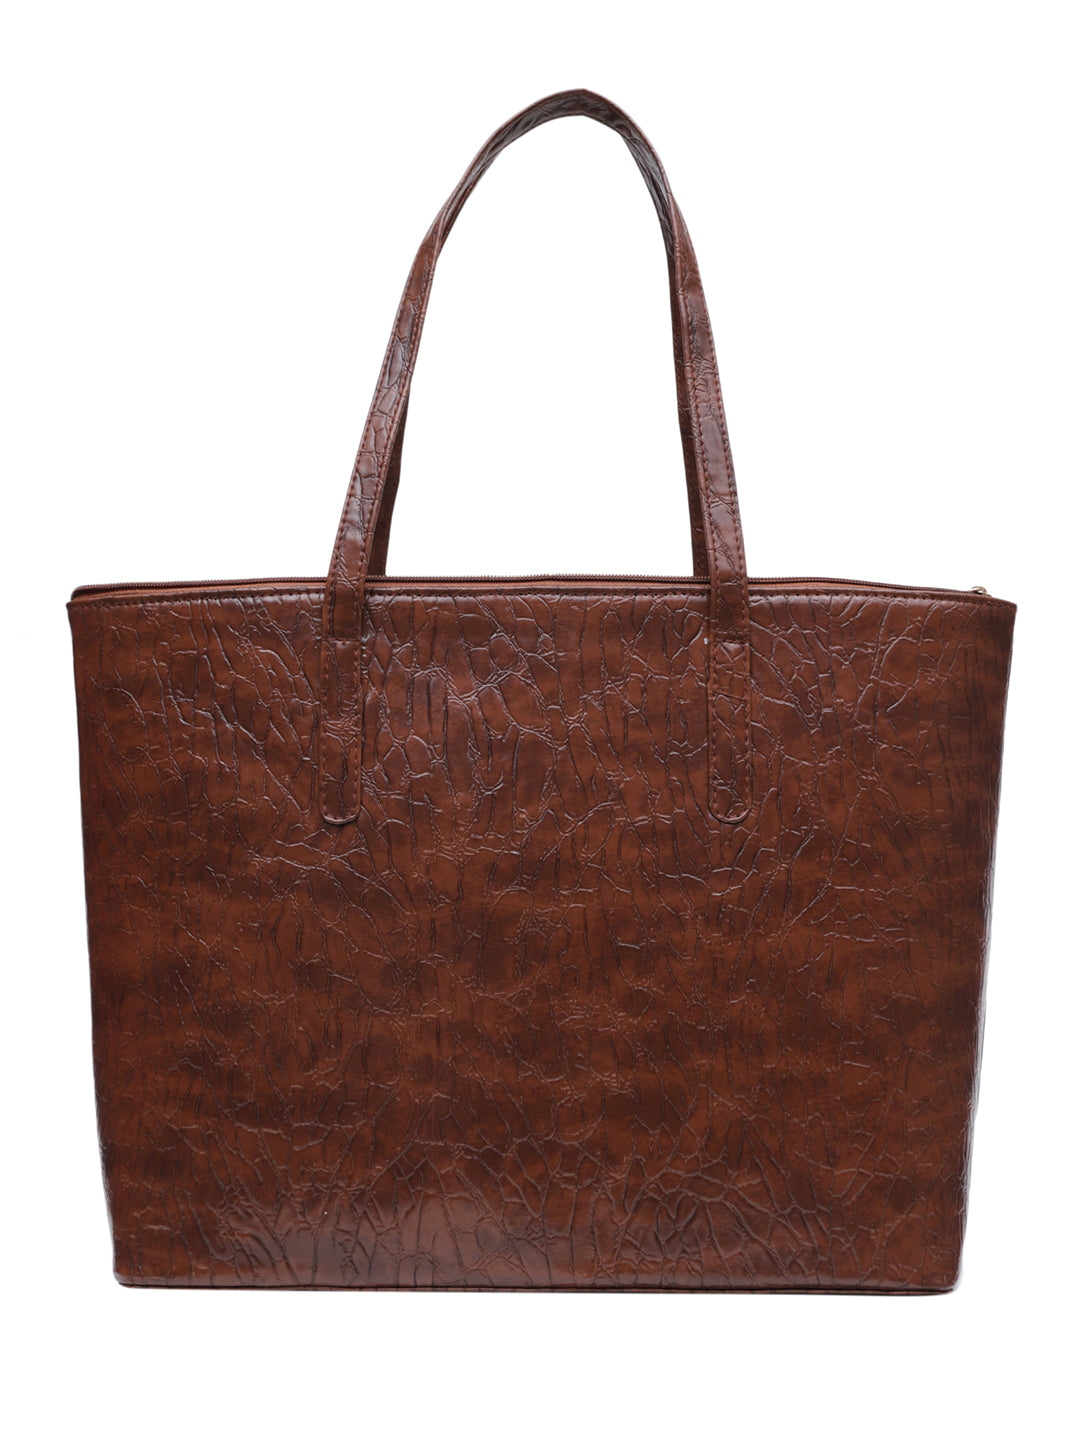 Louise tote MINI WESST Brown Casual Solid Tote Bag(MWTB078BR)